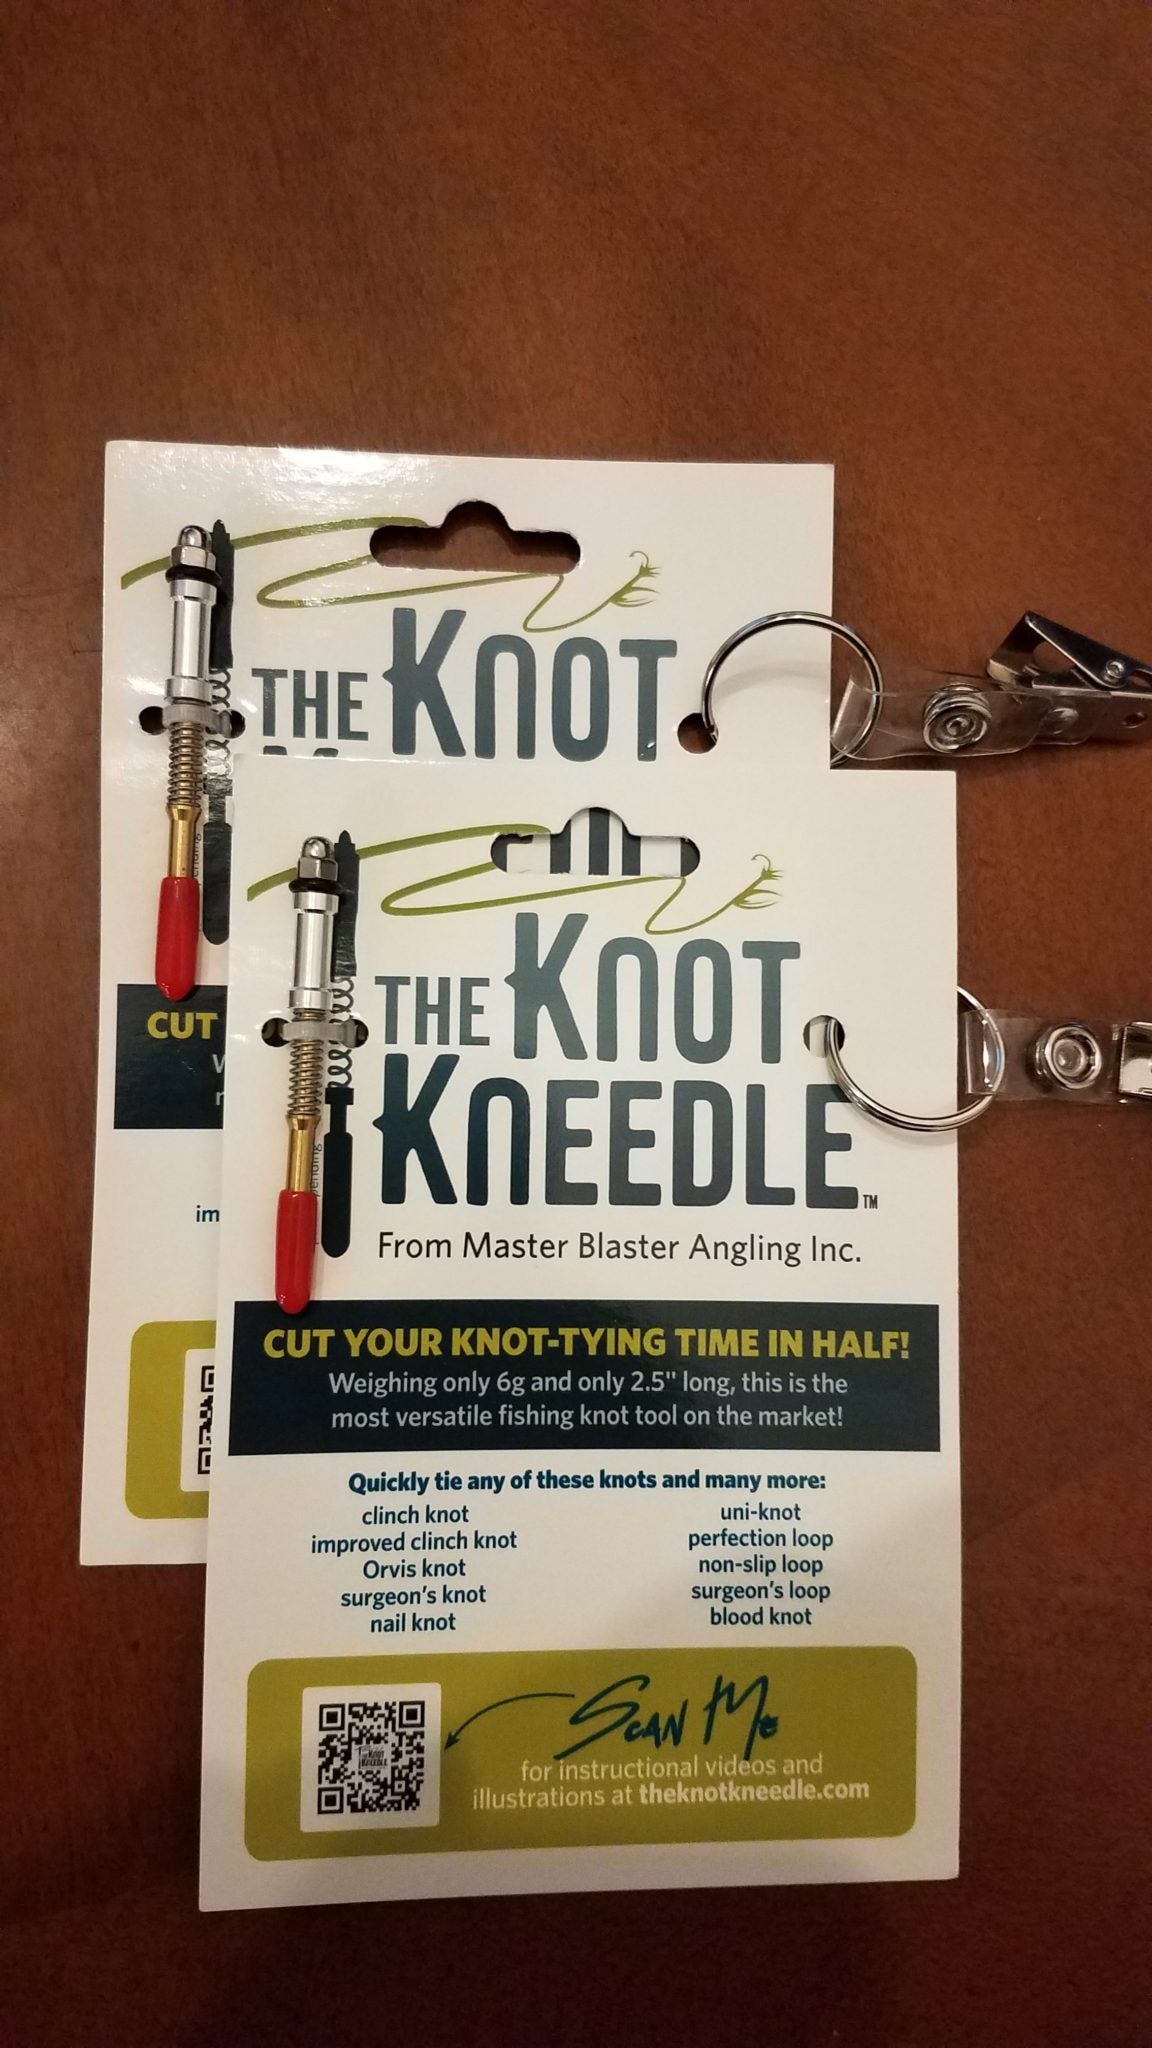 The Knot Kneedle™ - 2 for $19.90